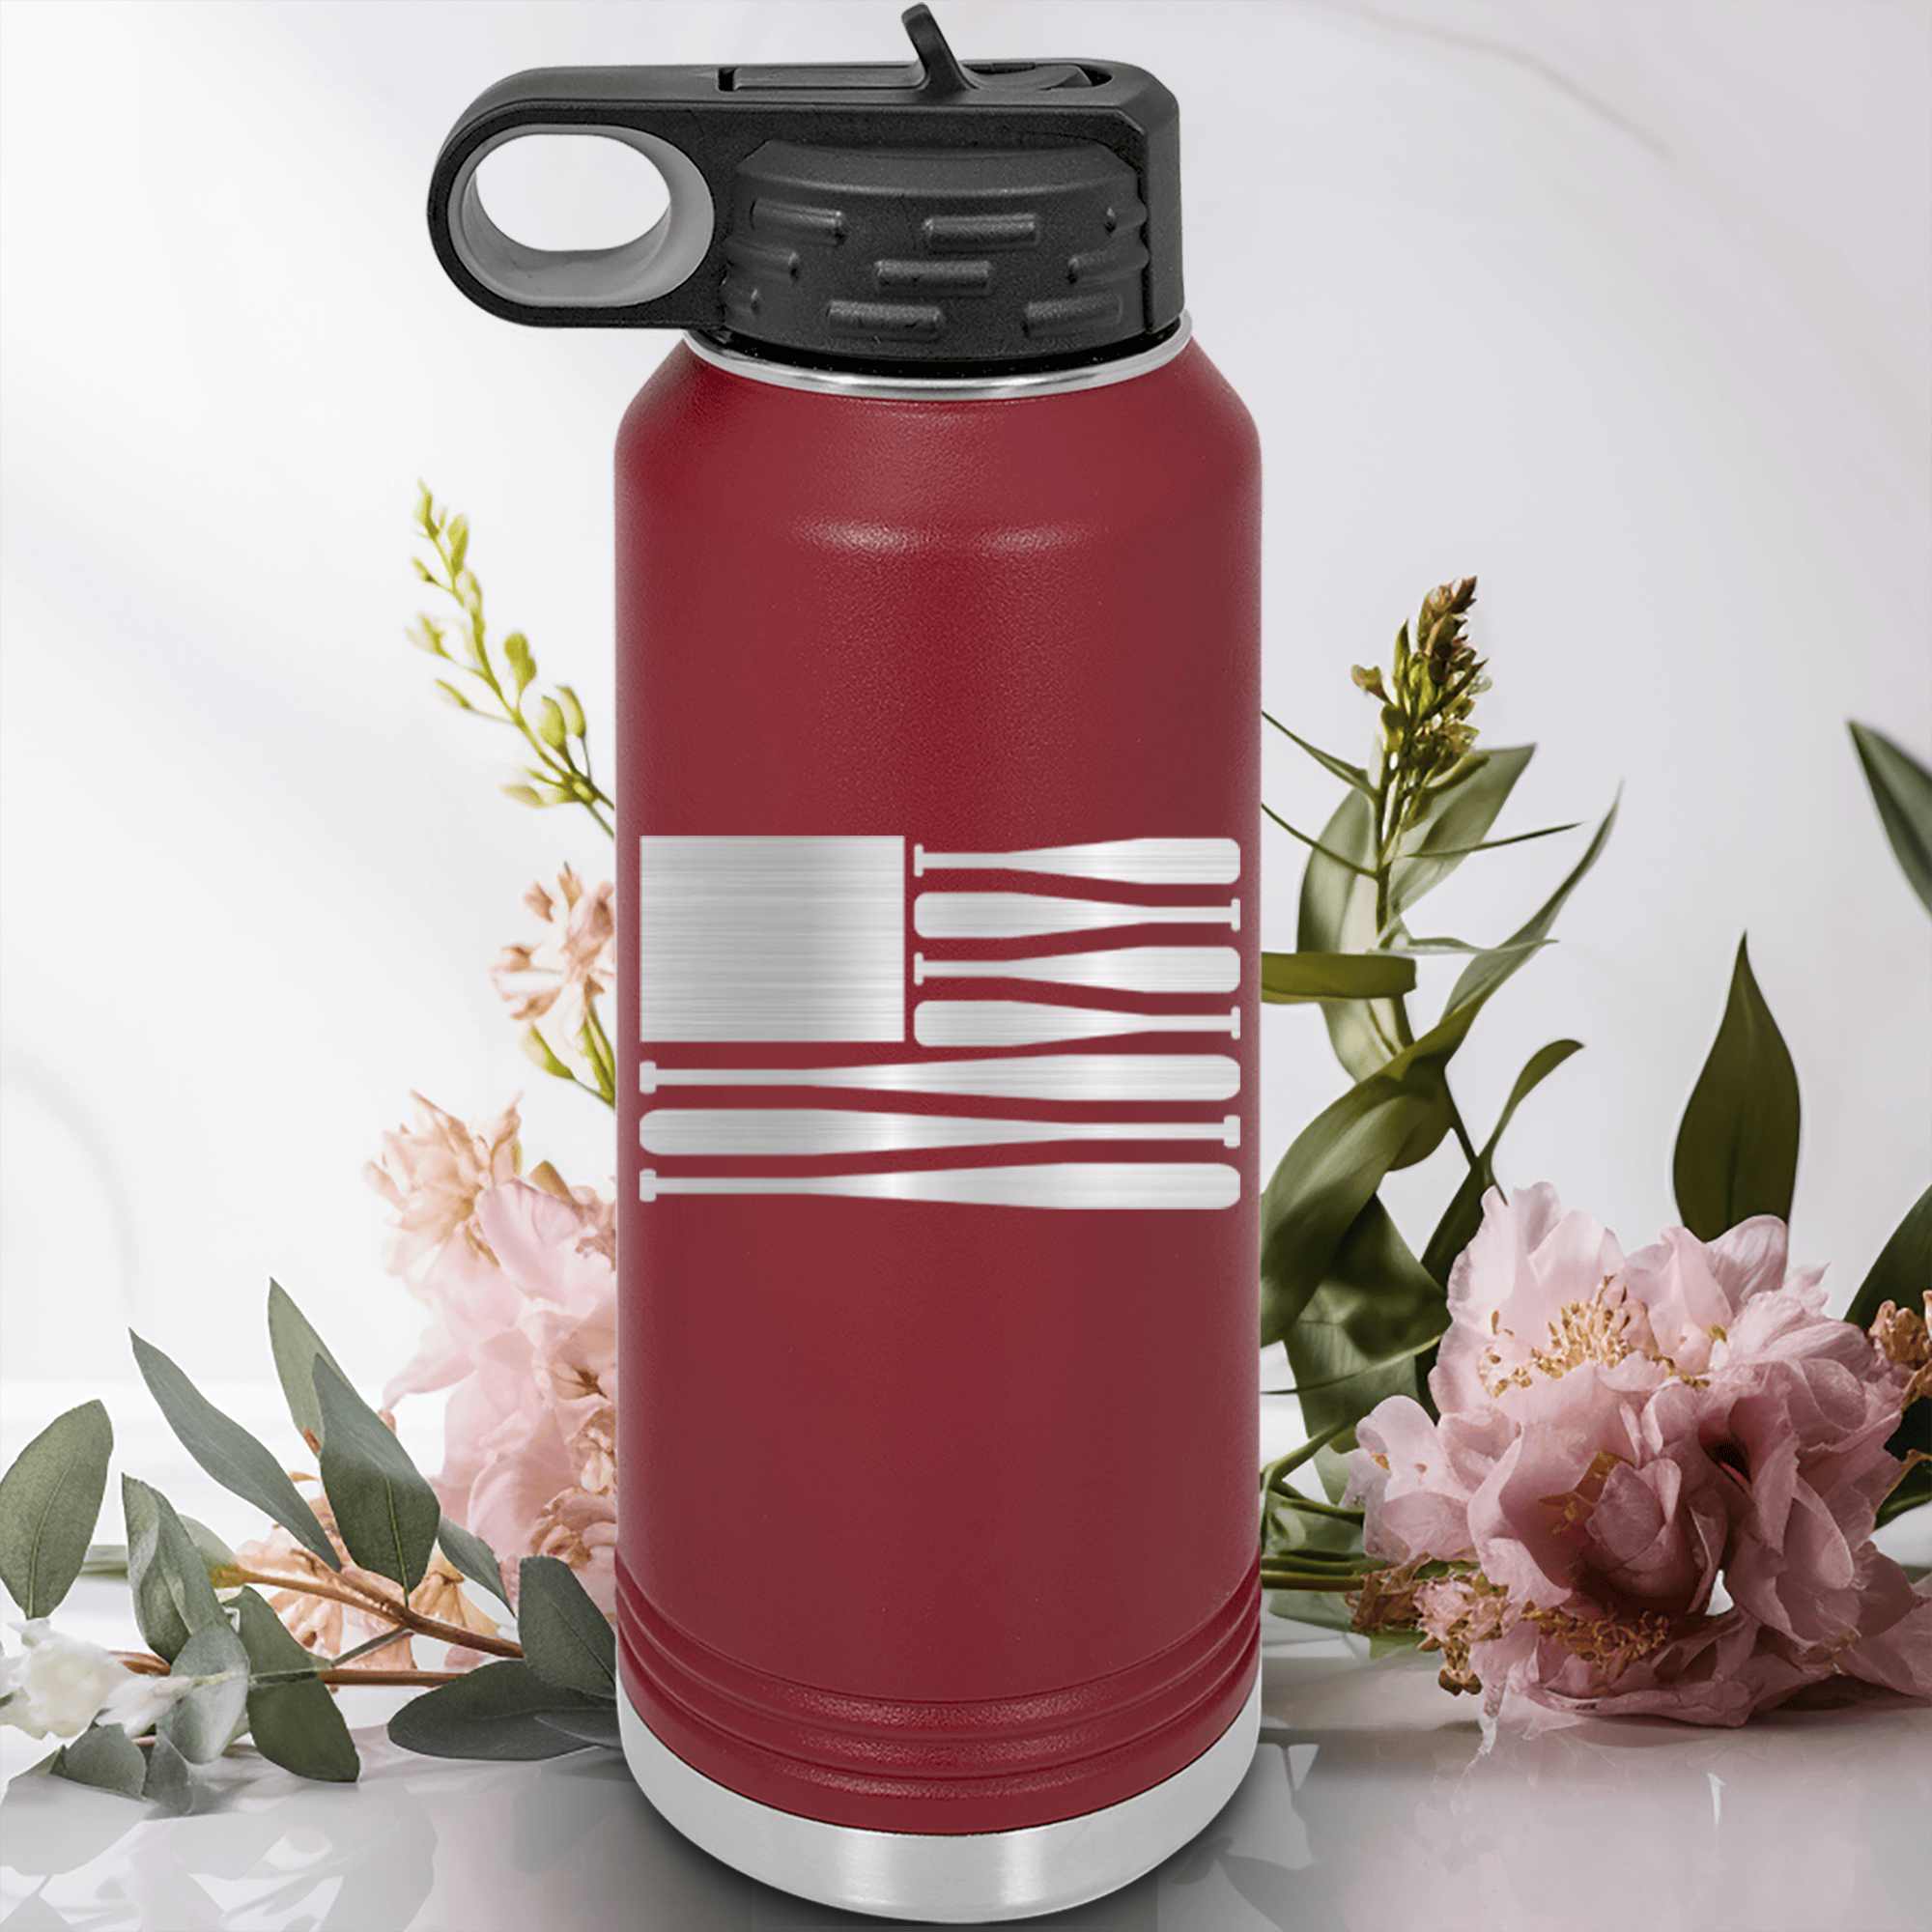 Maroon Baseball Water Bottle With Star Spangled Bats Design